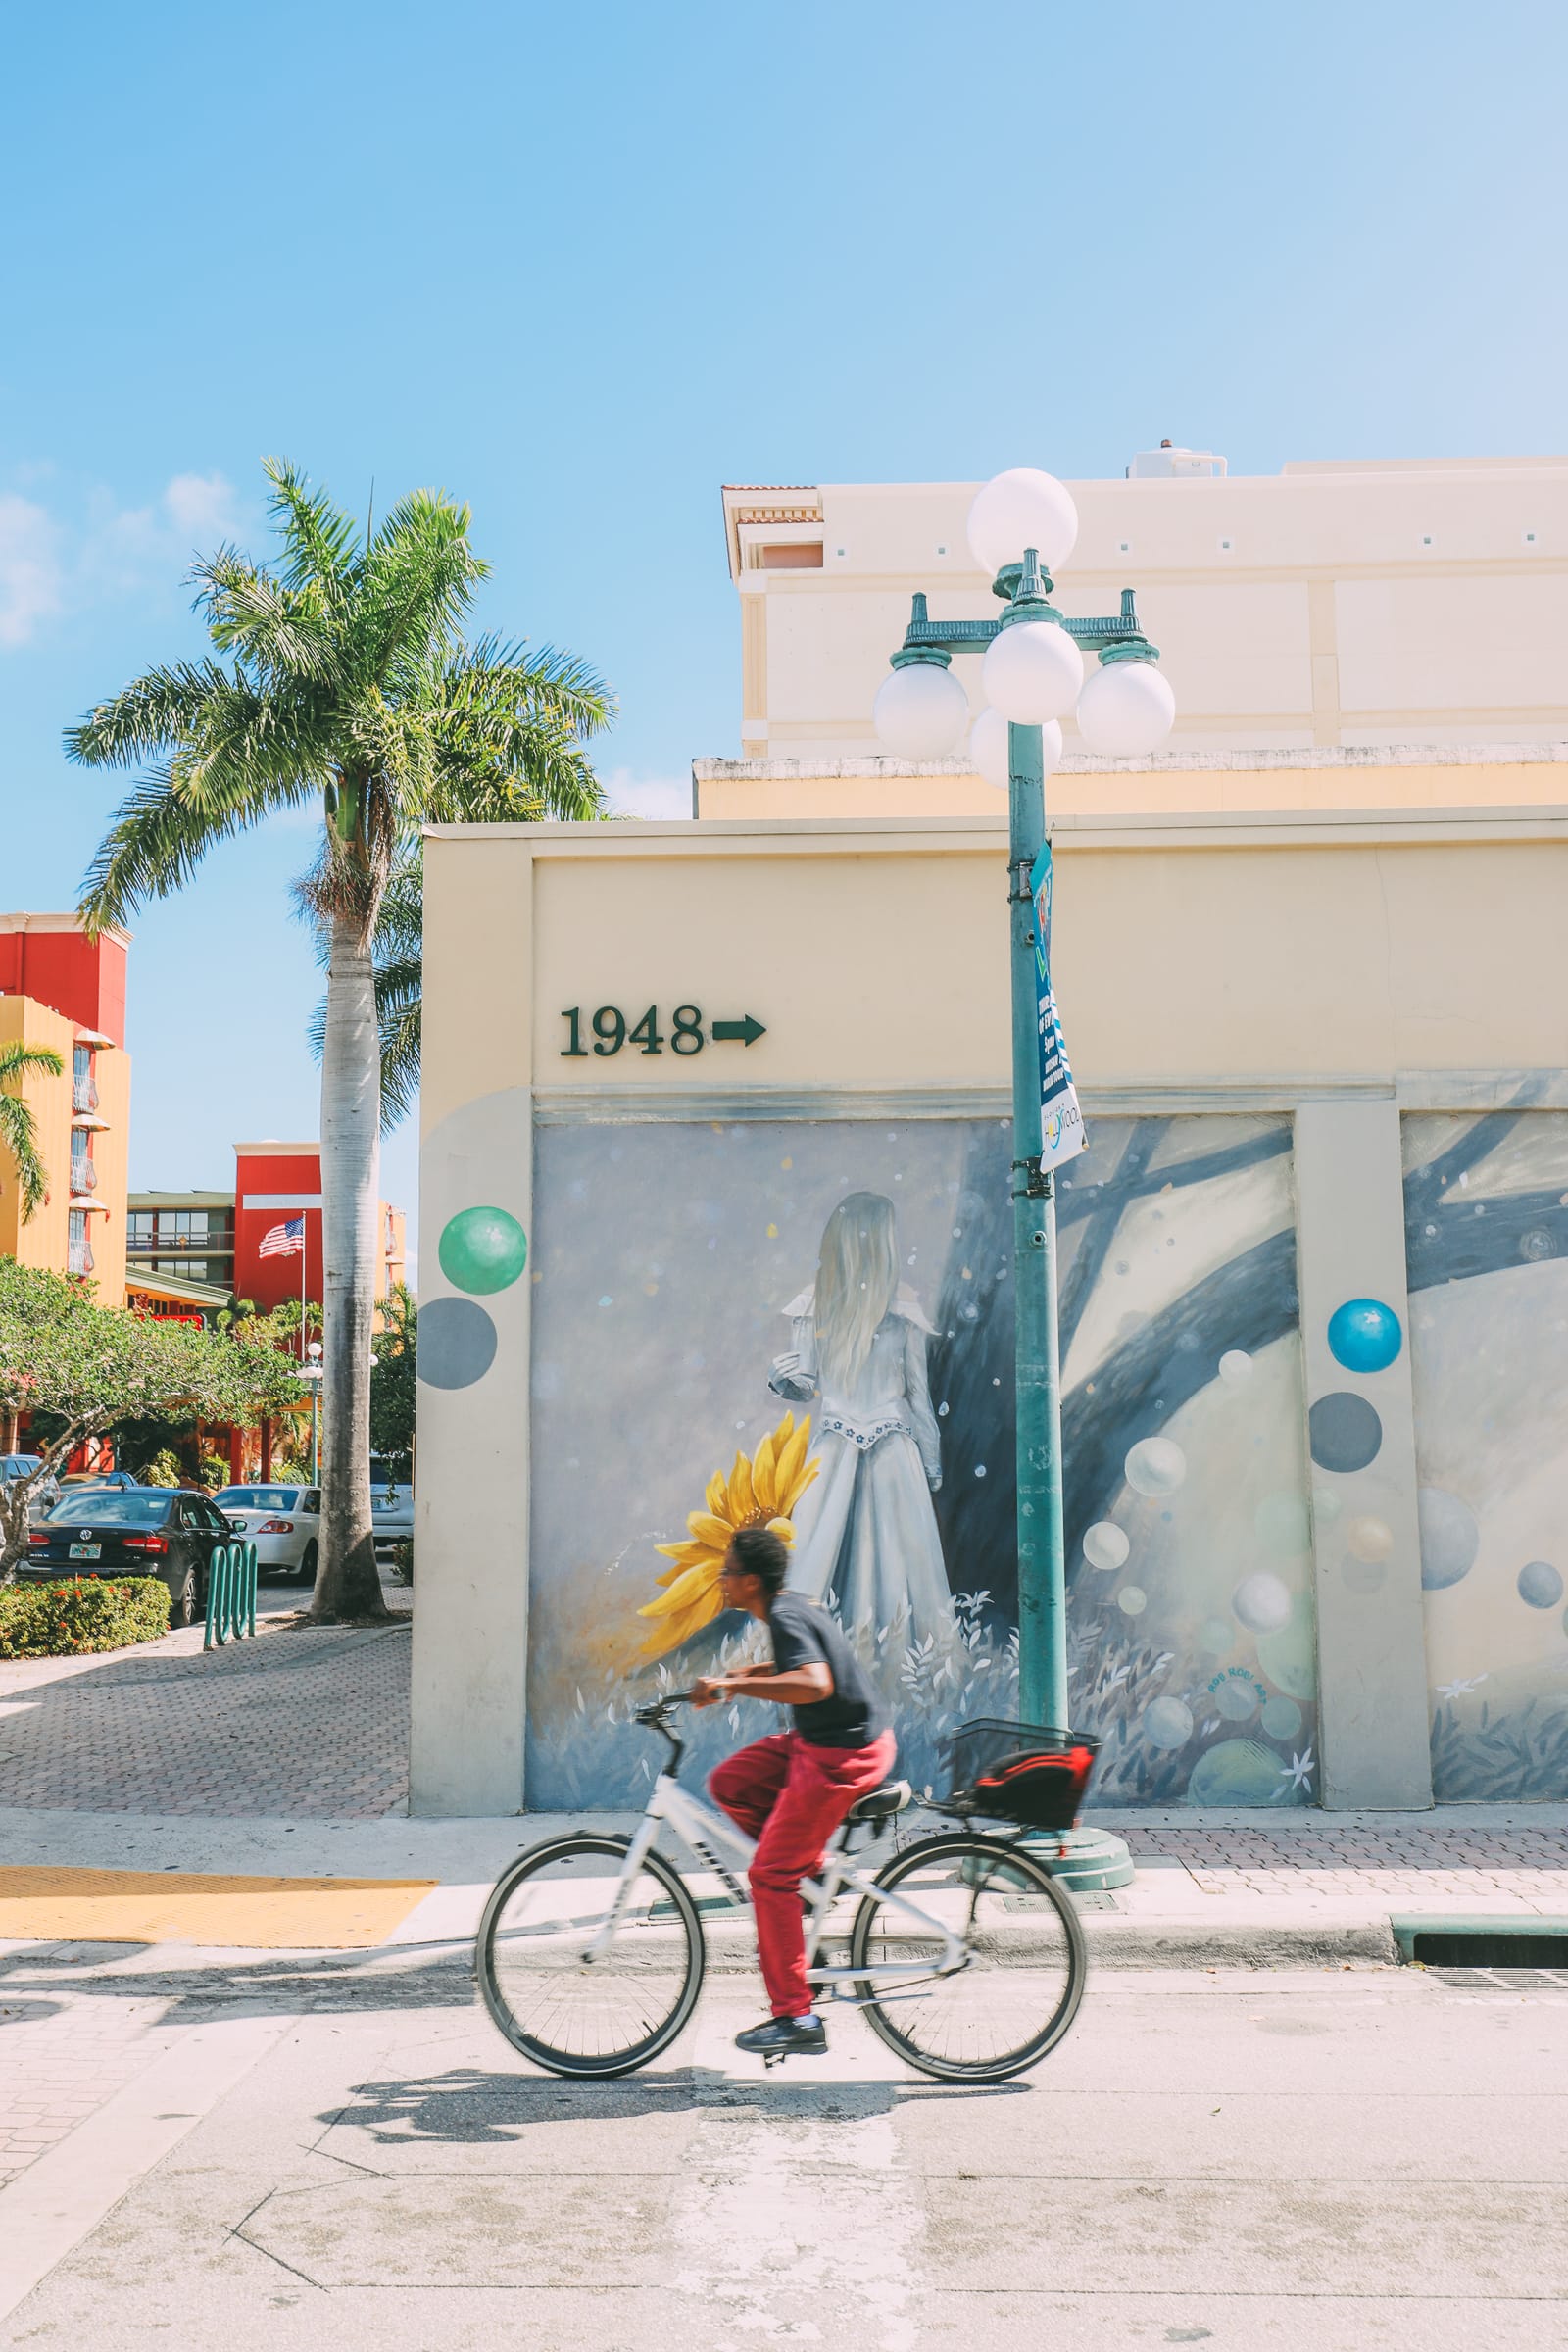 Vacation Spots Blog: 10 Best Things To Do In Hollywood, Florida